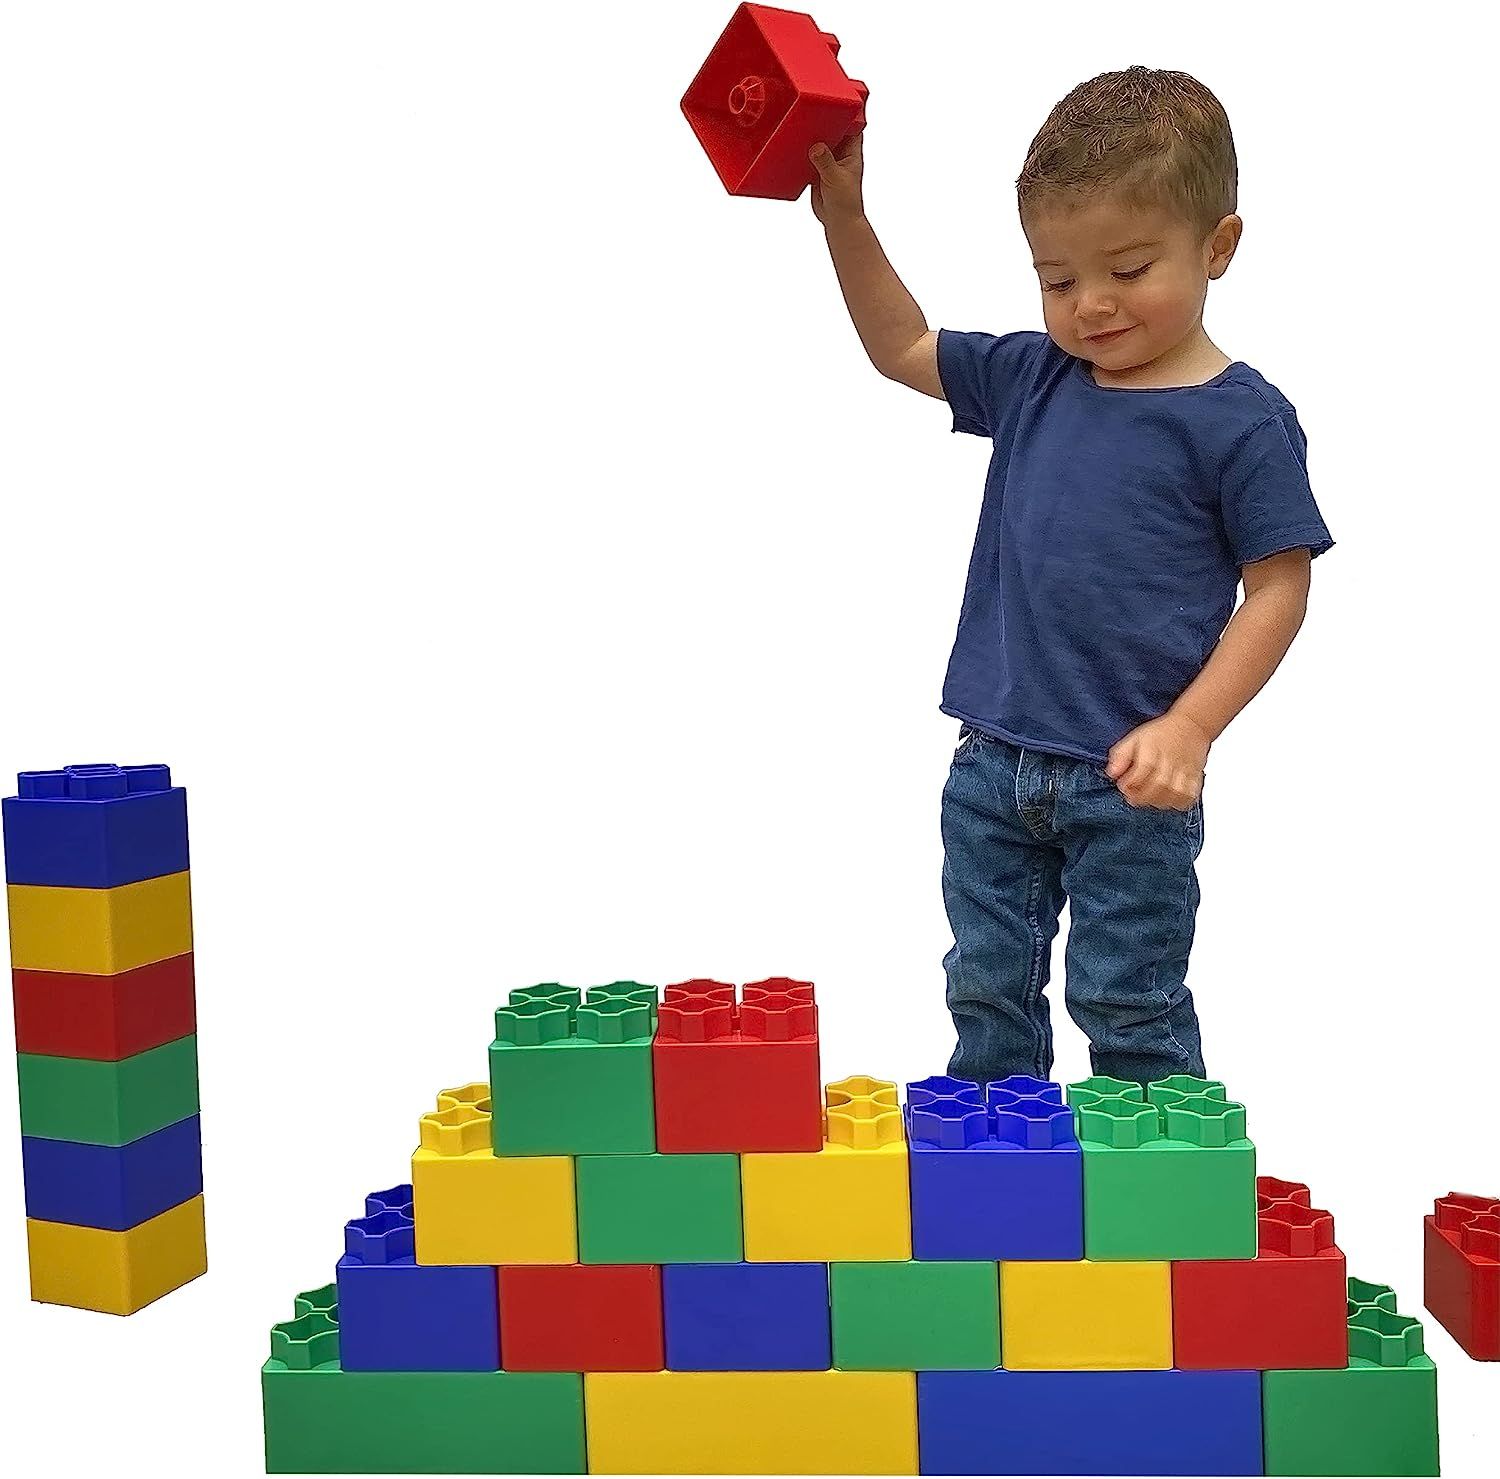 Foam Blocks for Toddlers, 138 Pieces EVA Soft Stacking Building Blocks Set  for Kids, Early Learning Construction Toys & Gifts for Kids, Boys & Girls